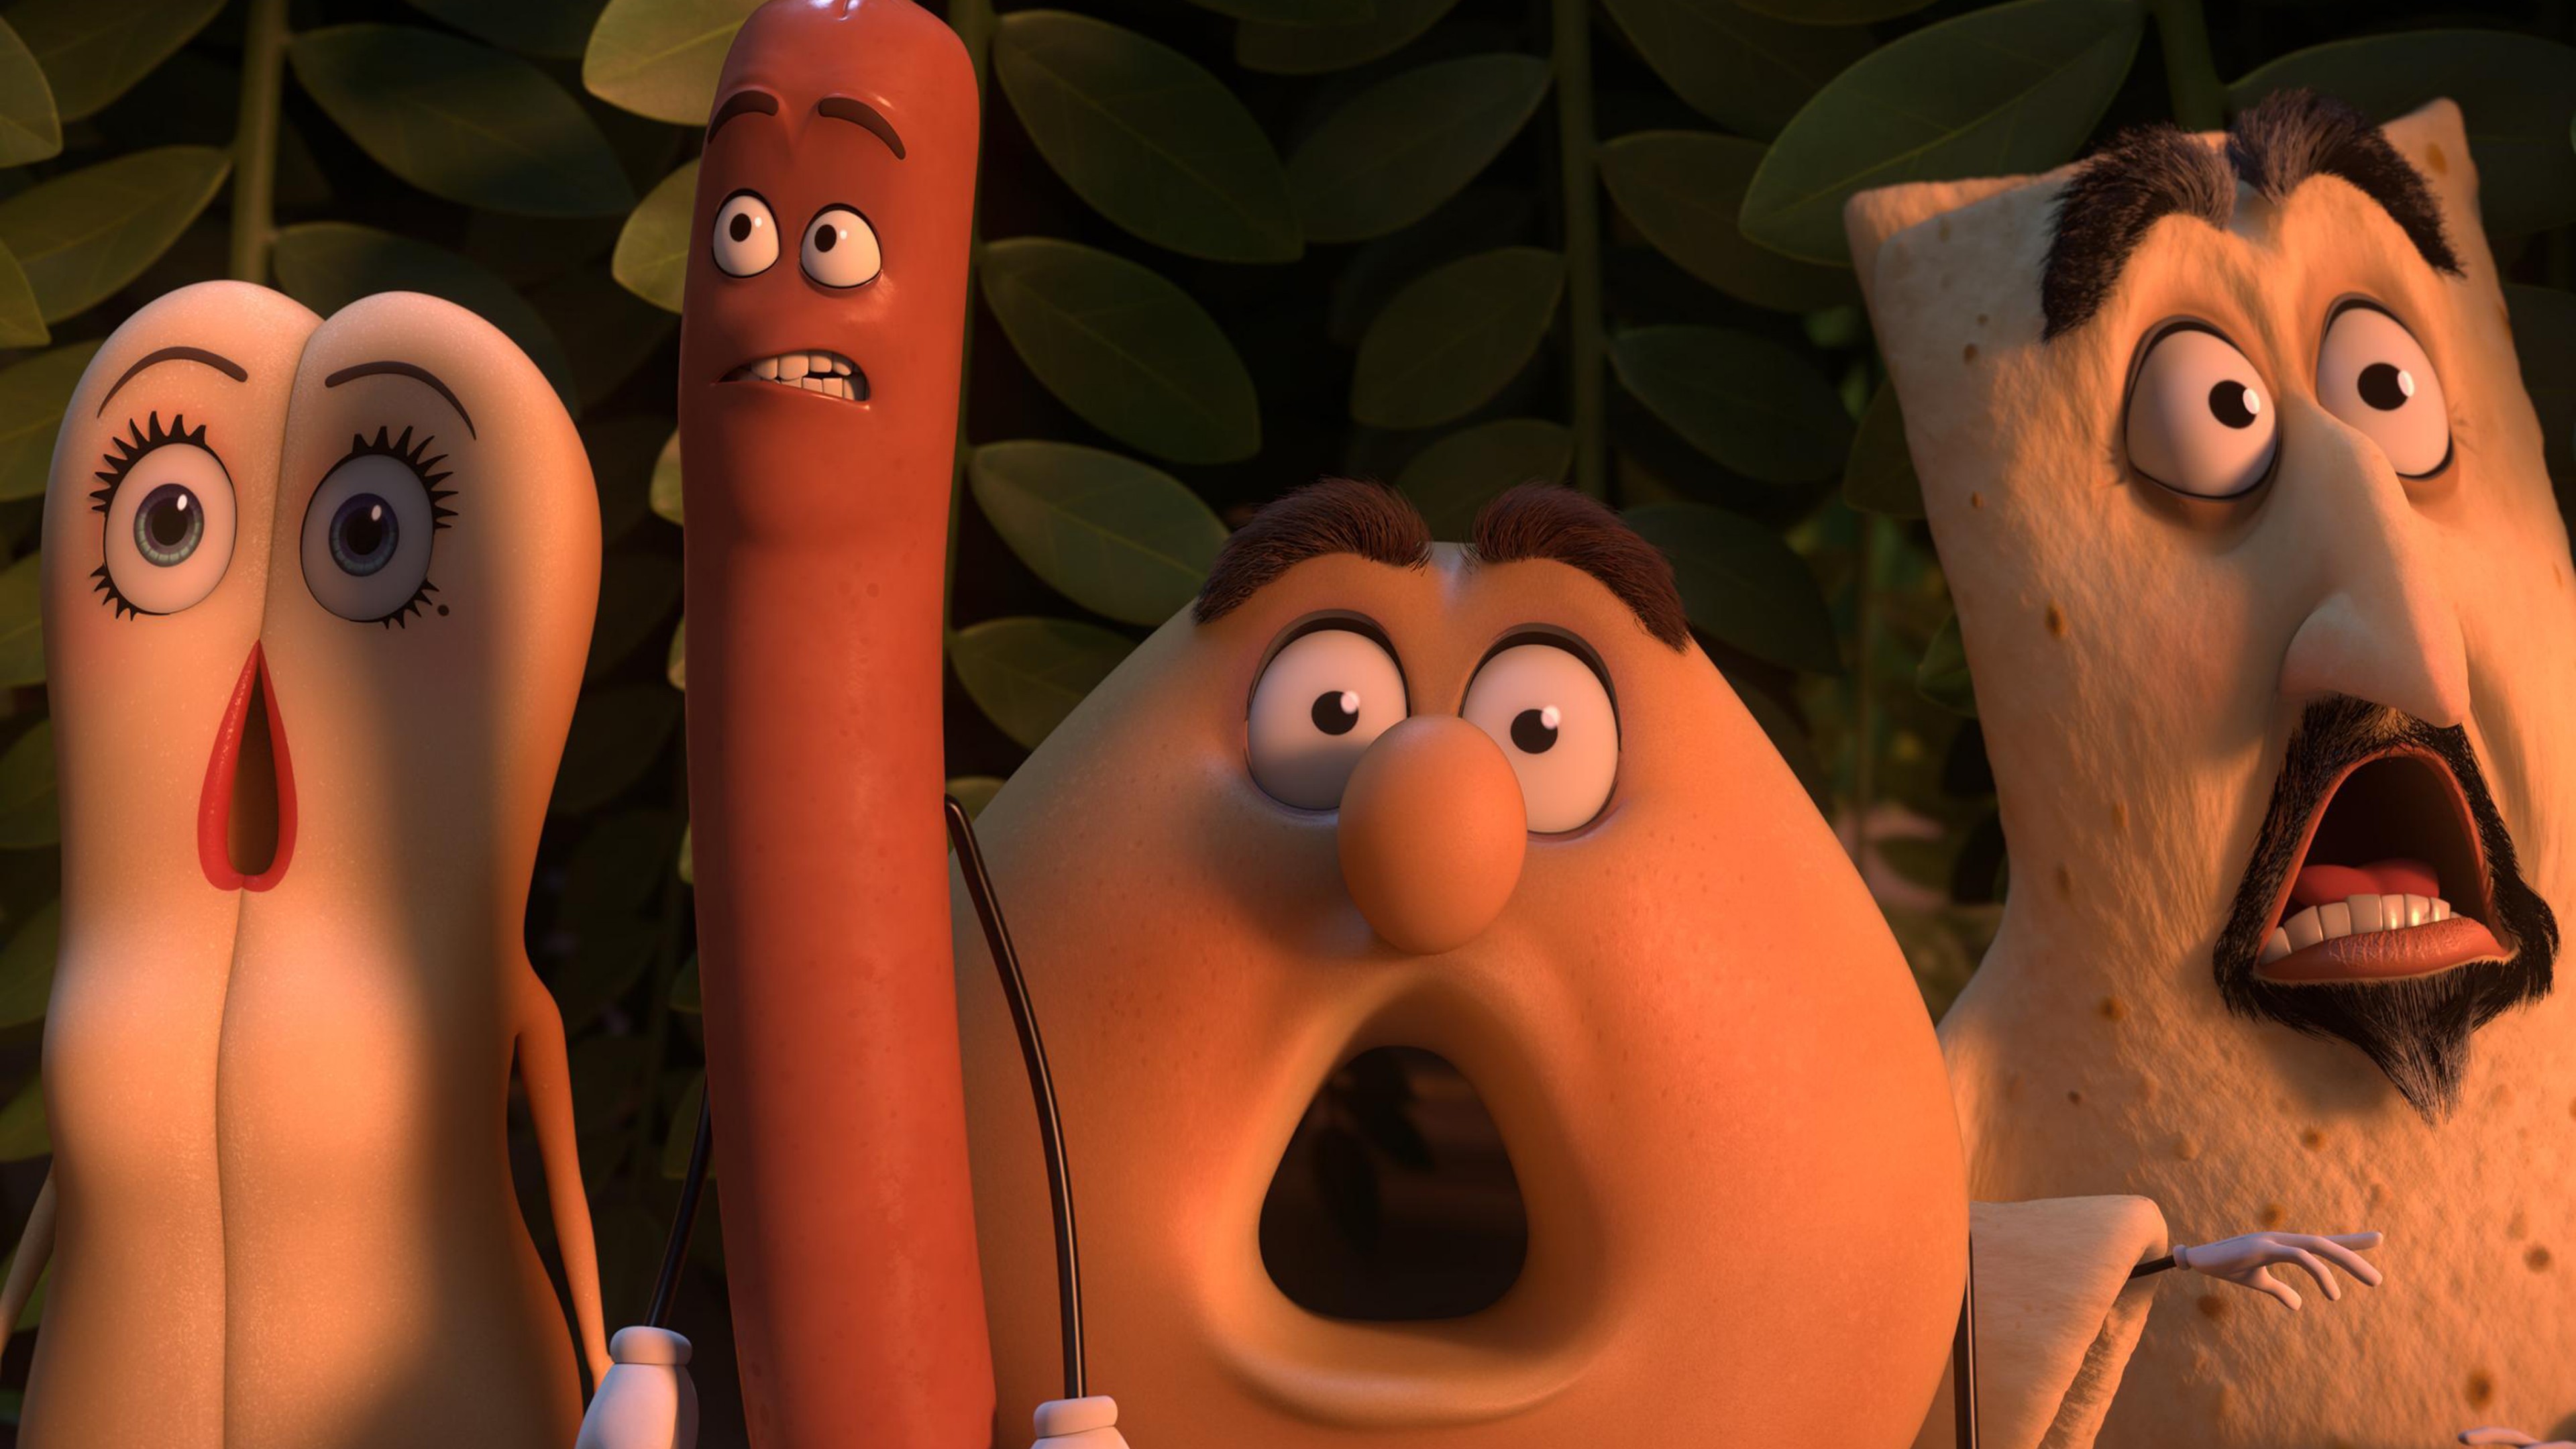 4k Resolution Wallpaper Of A Scene From The Movie Sausage Party